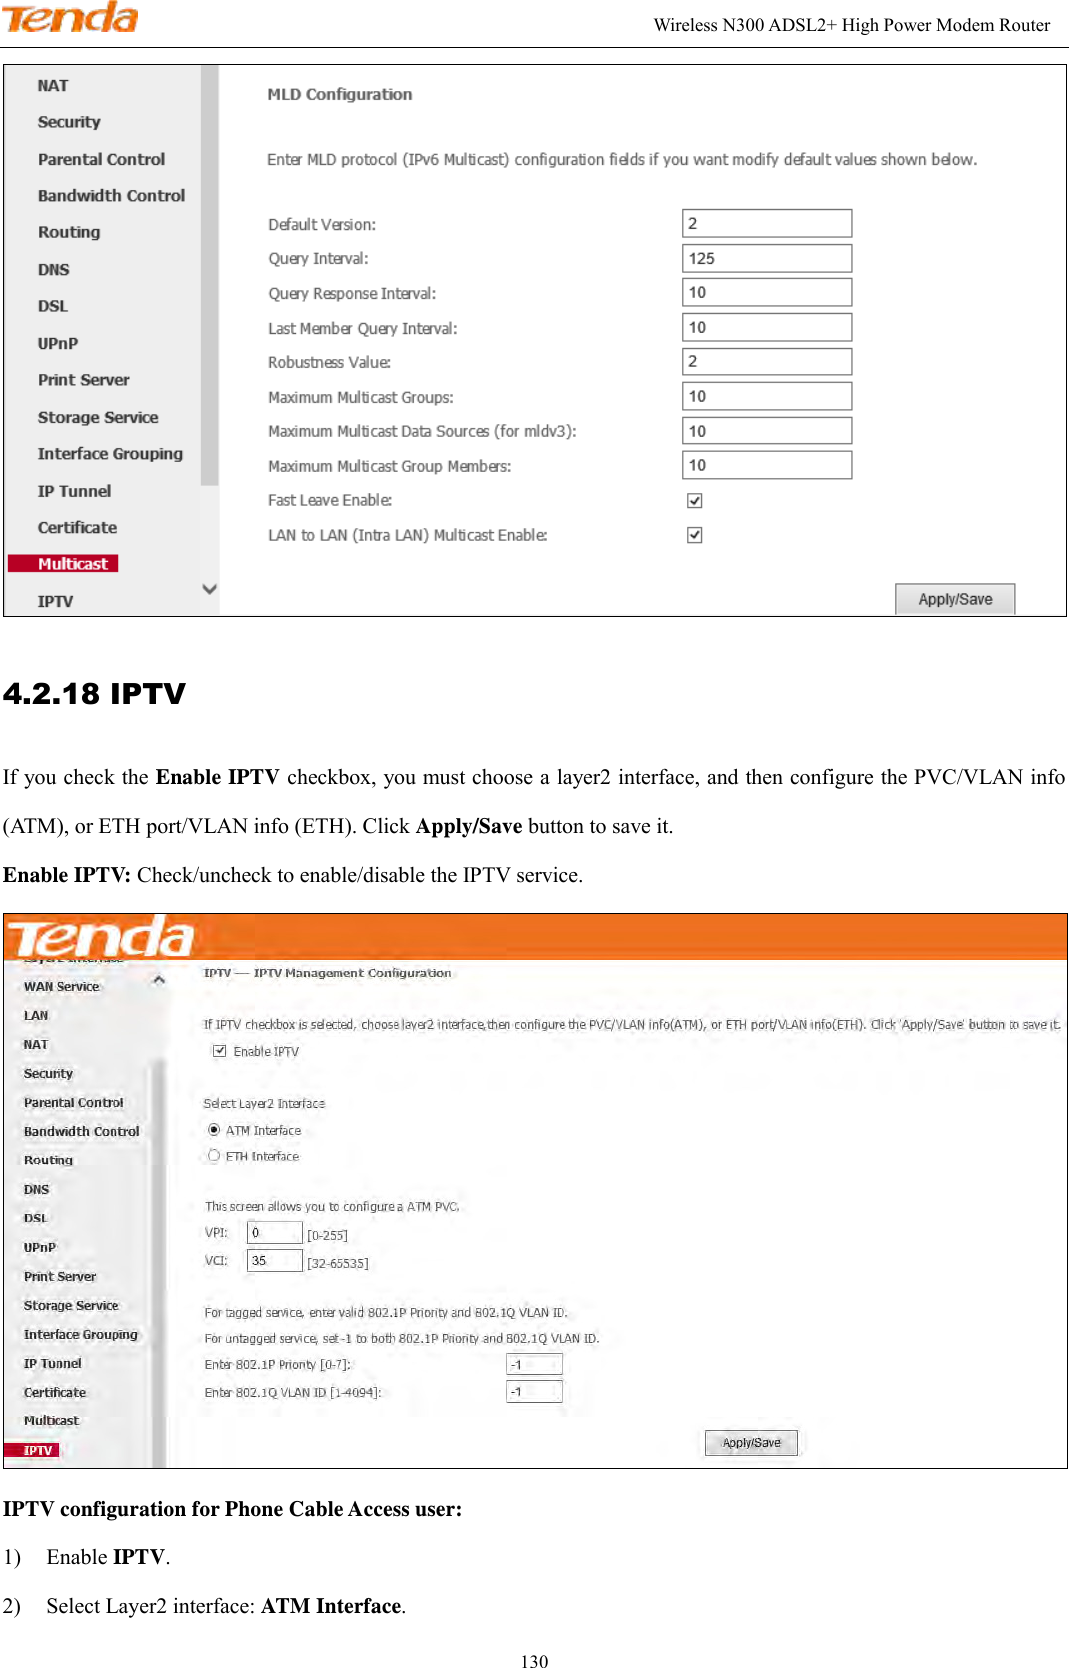                                                                                                               Wireless N300 ADSL2+ High Power Modem Router 130  4.2.18 IPTV If you check the Enable IPTV checkbox, you must choose a layer2 interface, and then configure the PVC/VLAN info (ATM), or ETH port/VLAN info (ETH). Click Apply/Save button to save it.   Enable IPTV: Check/uncheck to enable/disable the IPTV service.  IPTV configuration for Phone Cable Access user: 1) Enable IPTV. 2) Select Layer2 interface: ATM Interface. 